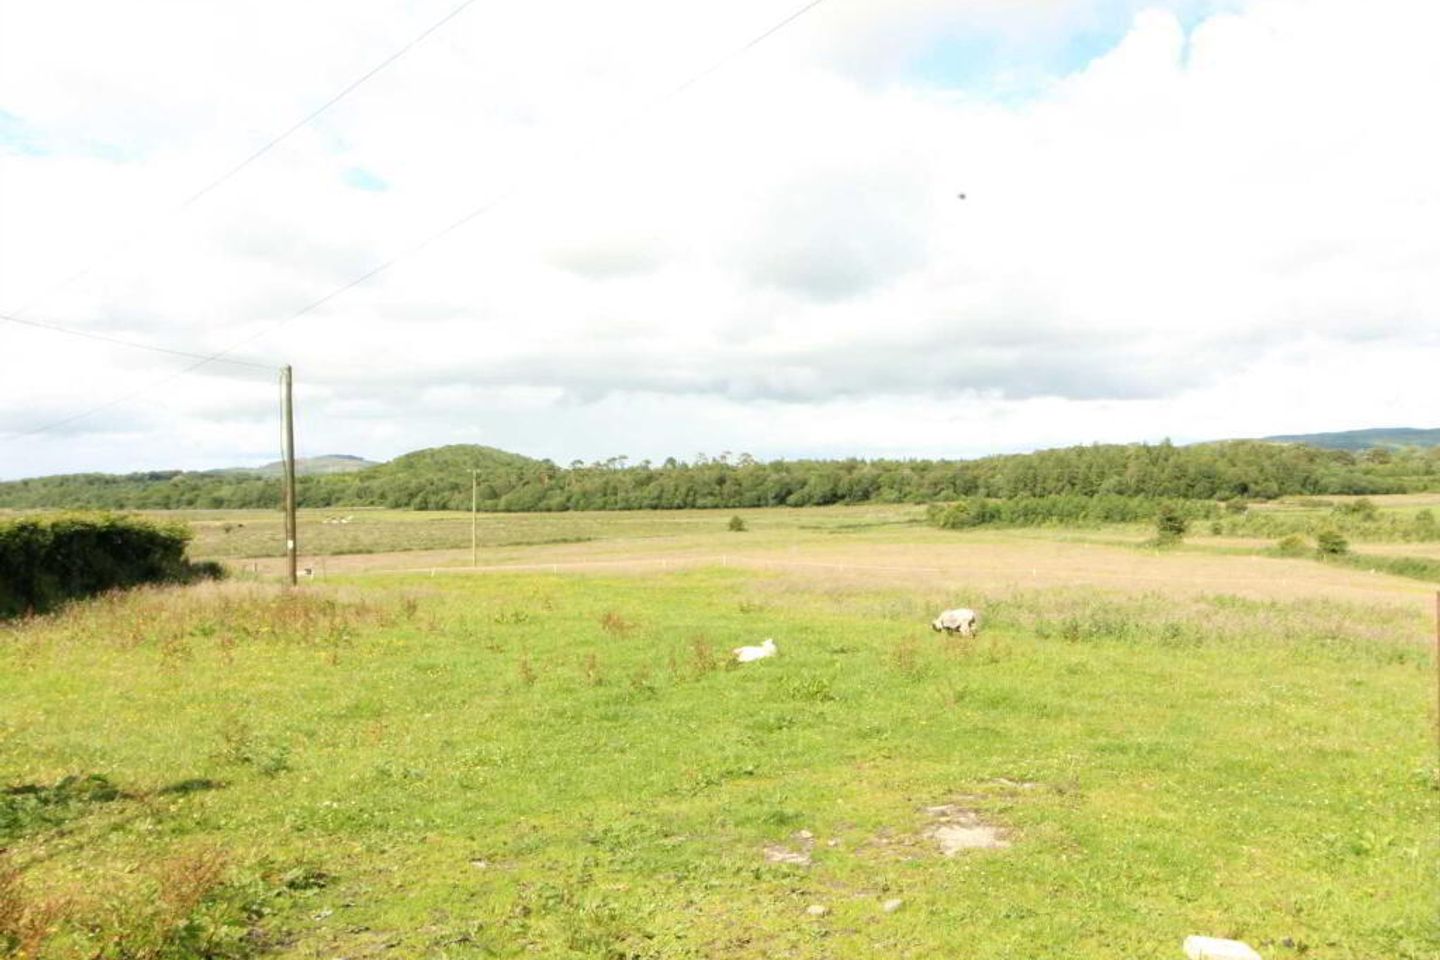 Residential Site, Tullymore, Brownhall, Balla, Co. Mayo